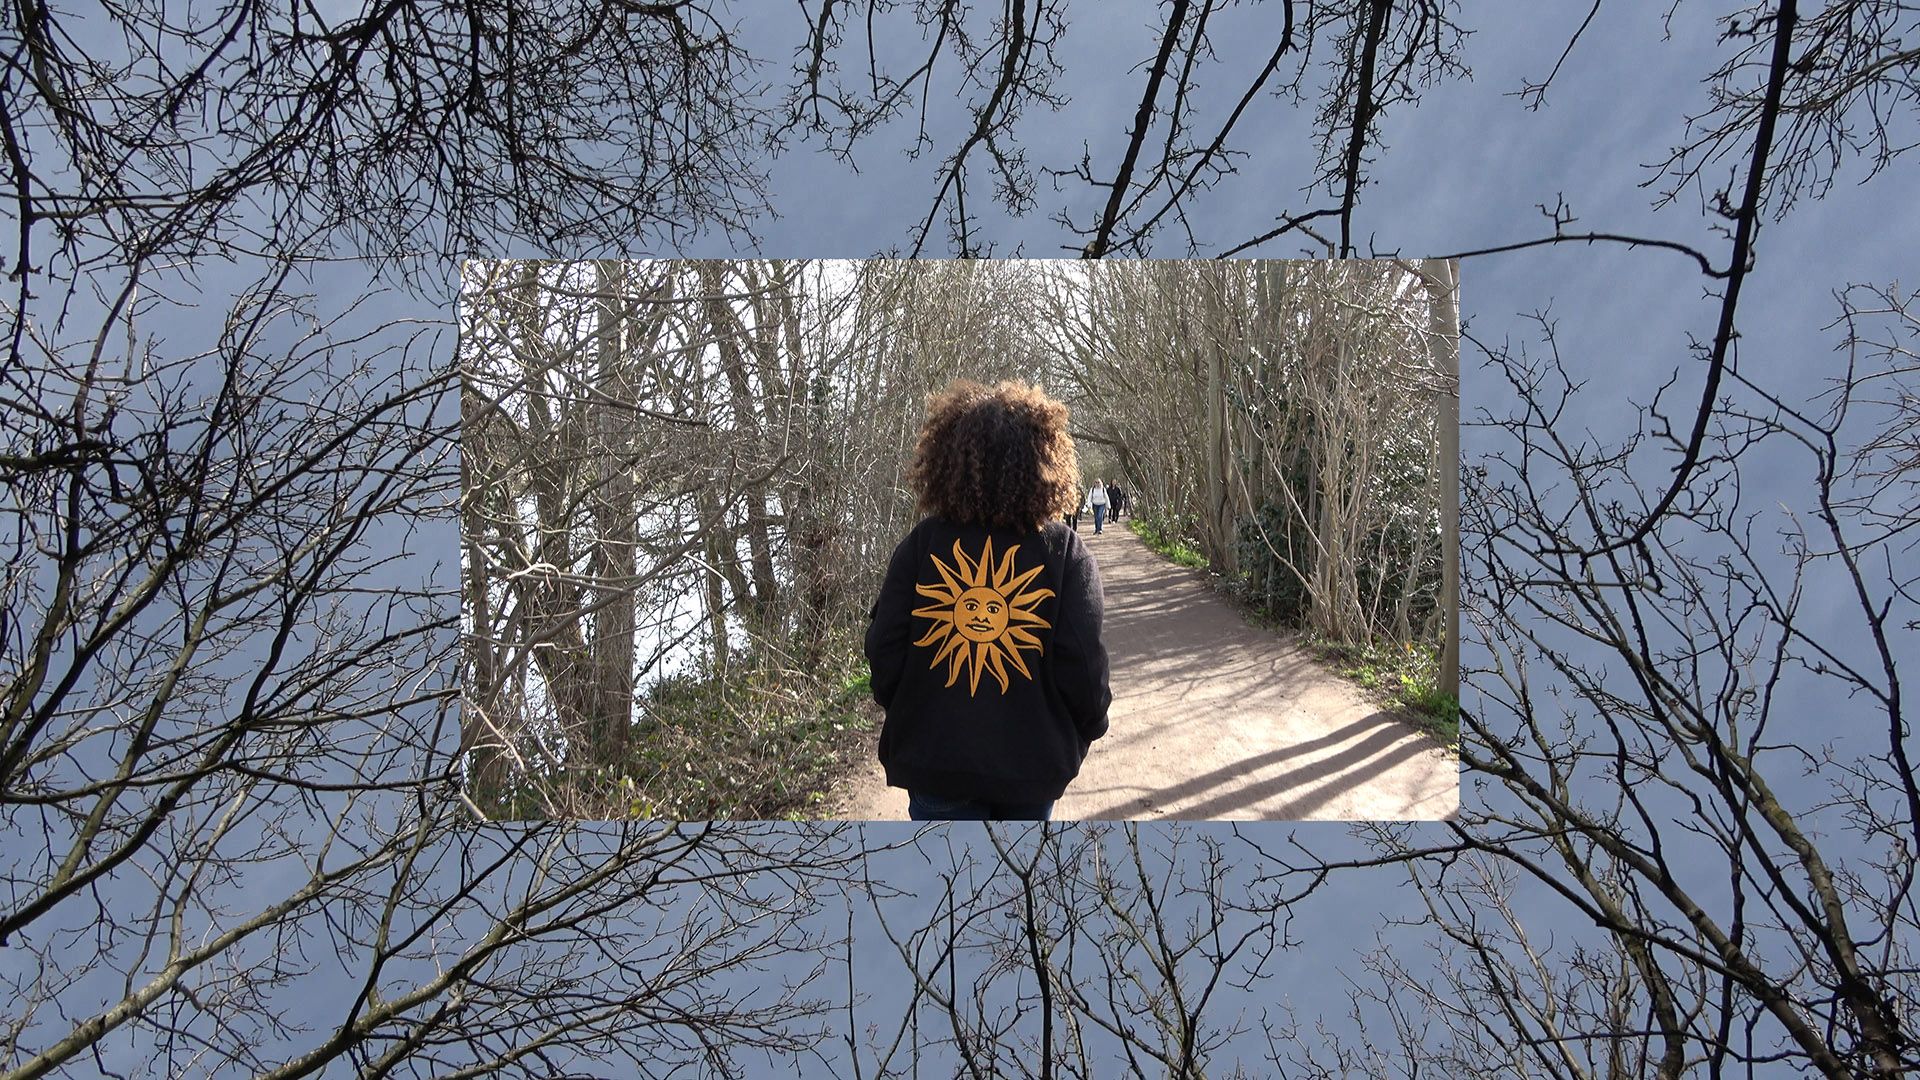 An image of Jamila from the back. She's walking down a pedestrian path lined by bare trees and a river on the left. Jamila is wearing a black jacket which has an image of a yellow sun with a face on the back. The image is overlaid on a larger image of blue sky with bare tree branches coming into the frame from all sides.